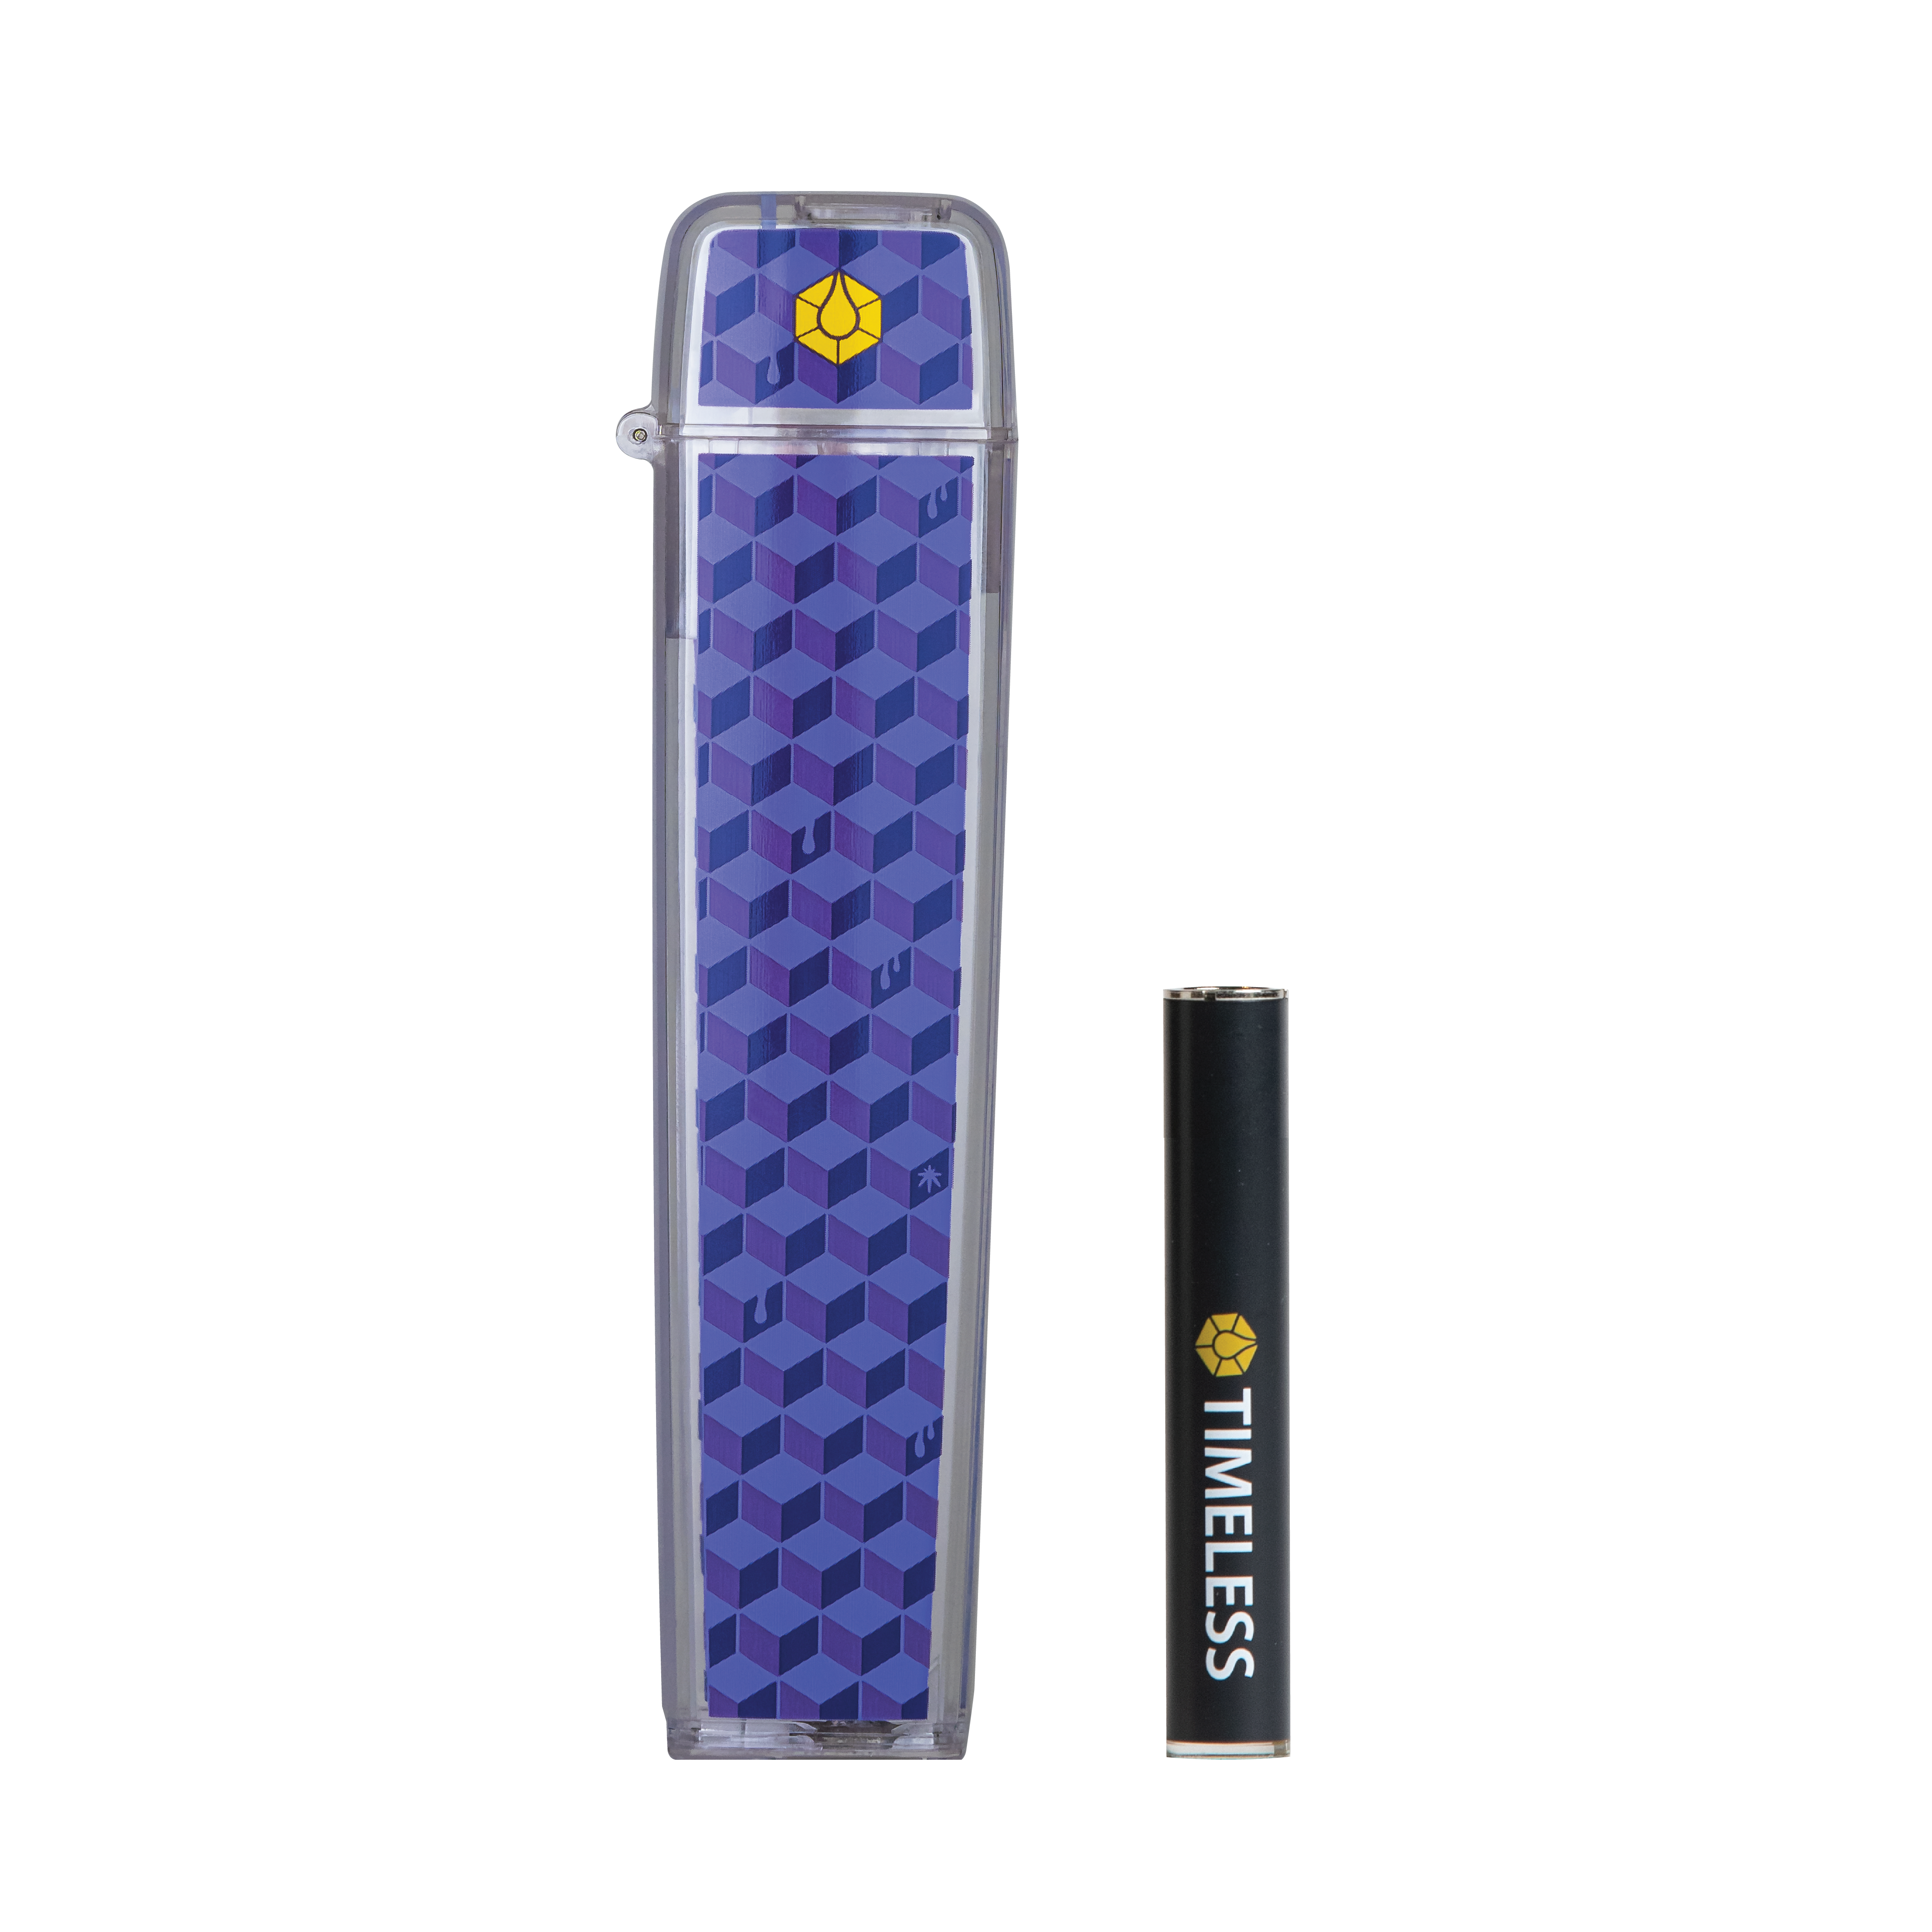 A photograph of Timeless TV6 1g Battery and Flip Case Combo (Purple/Black)